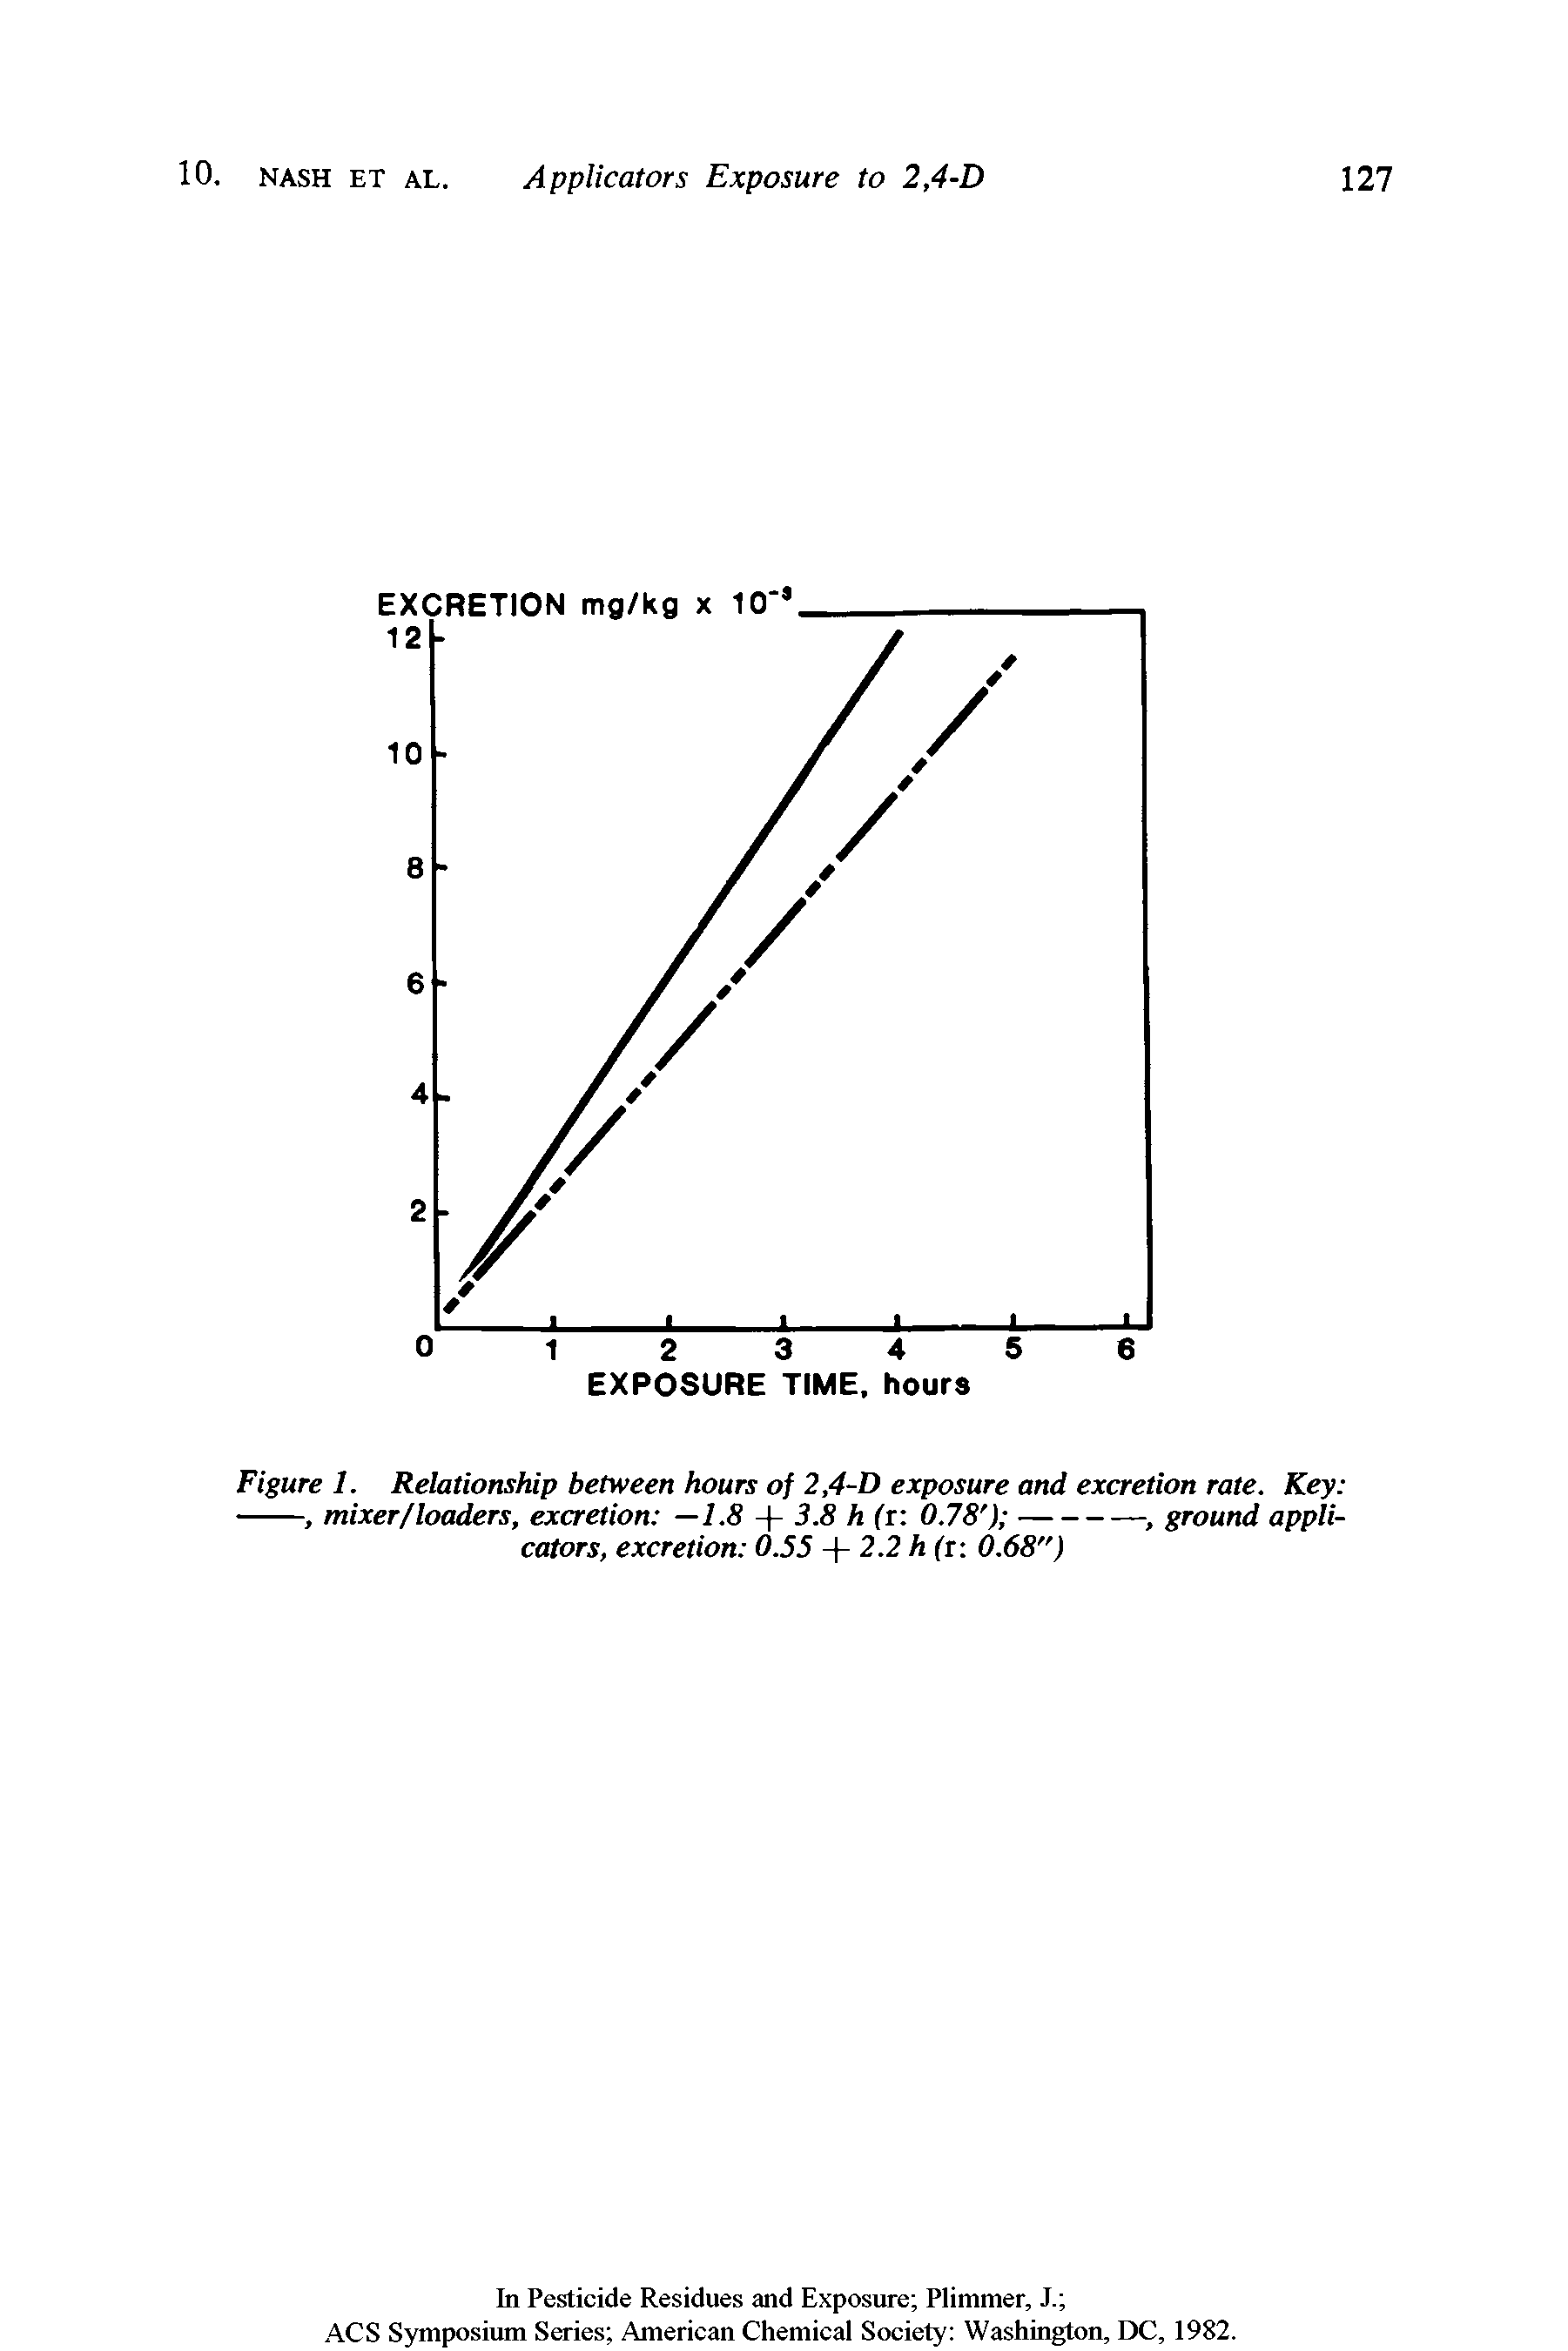 Figure 1. Relationship between hours of 2,4-D exposure and excretion rate. Key -----, mixer/loaders, excretion —1.8 + 3.8 h (r 0.78 ) ---------, ground applicators, excretion 0.55 + 2.2 h (r 0.68")...